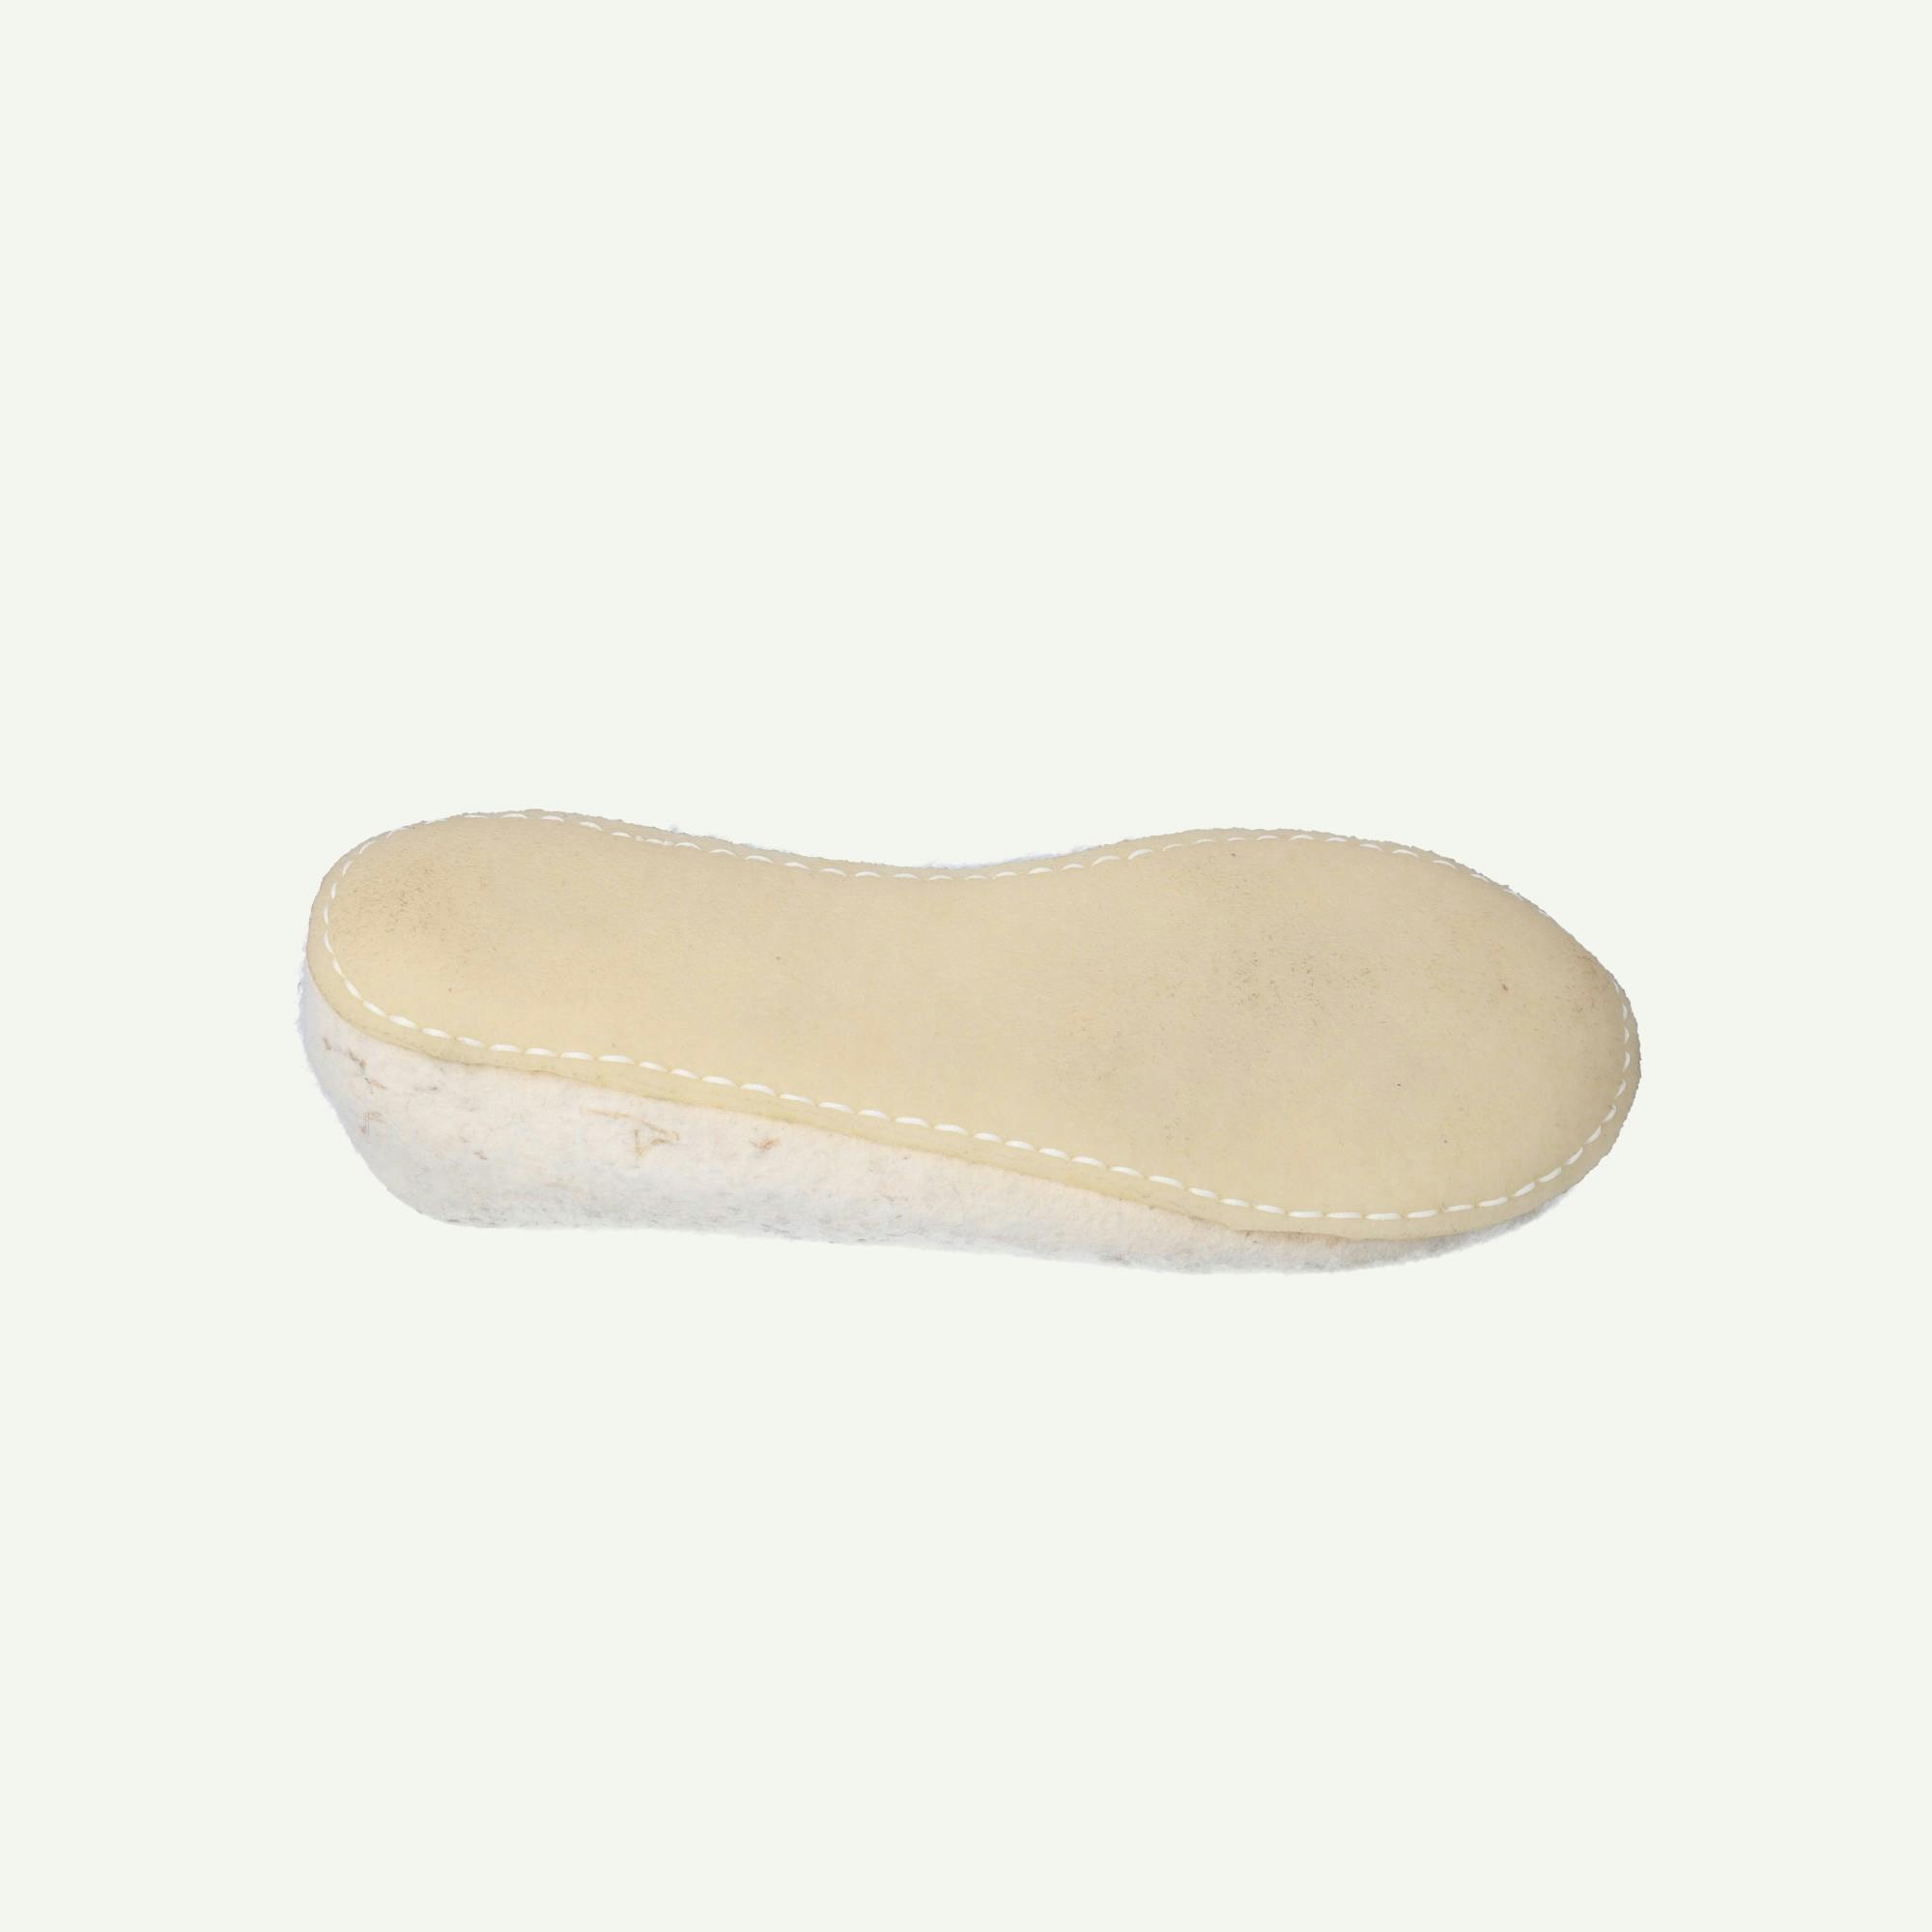 Finisterre Bowmont Slippers imperfection 1